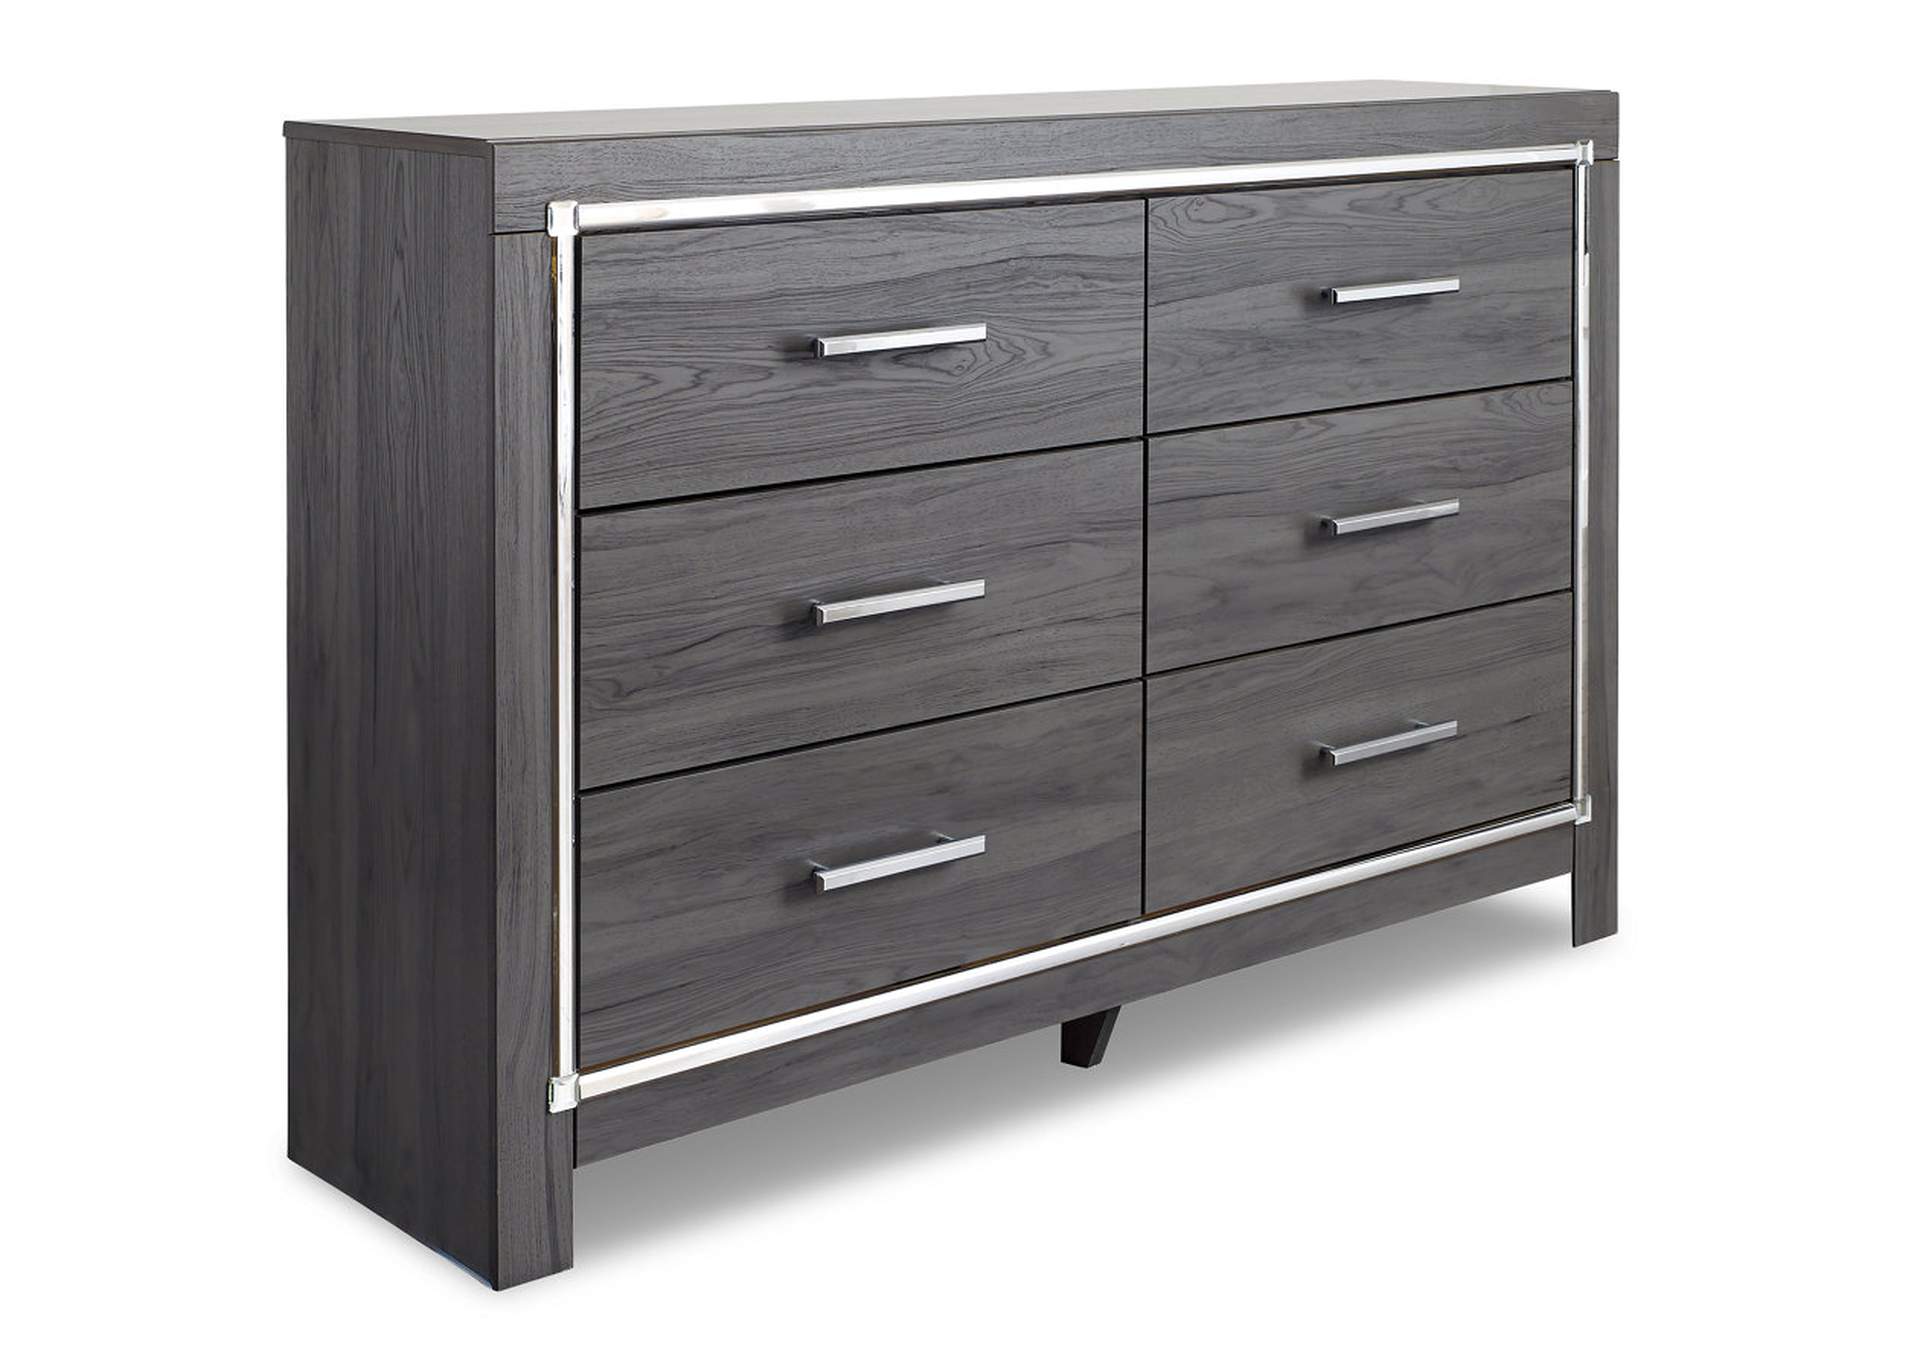 Lodanna Queen Panel Bed with Dresser,Signature Design By Ashley